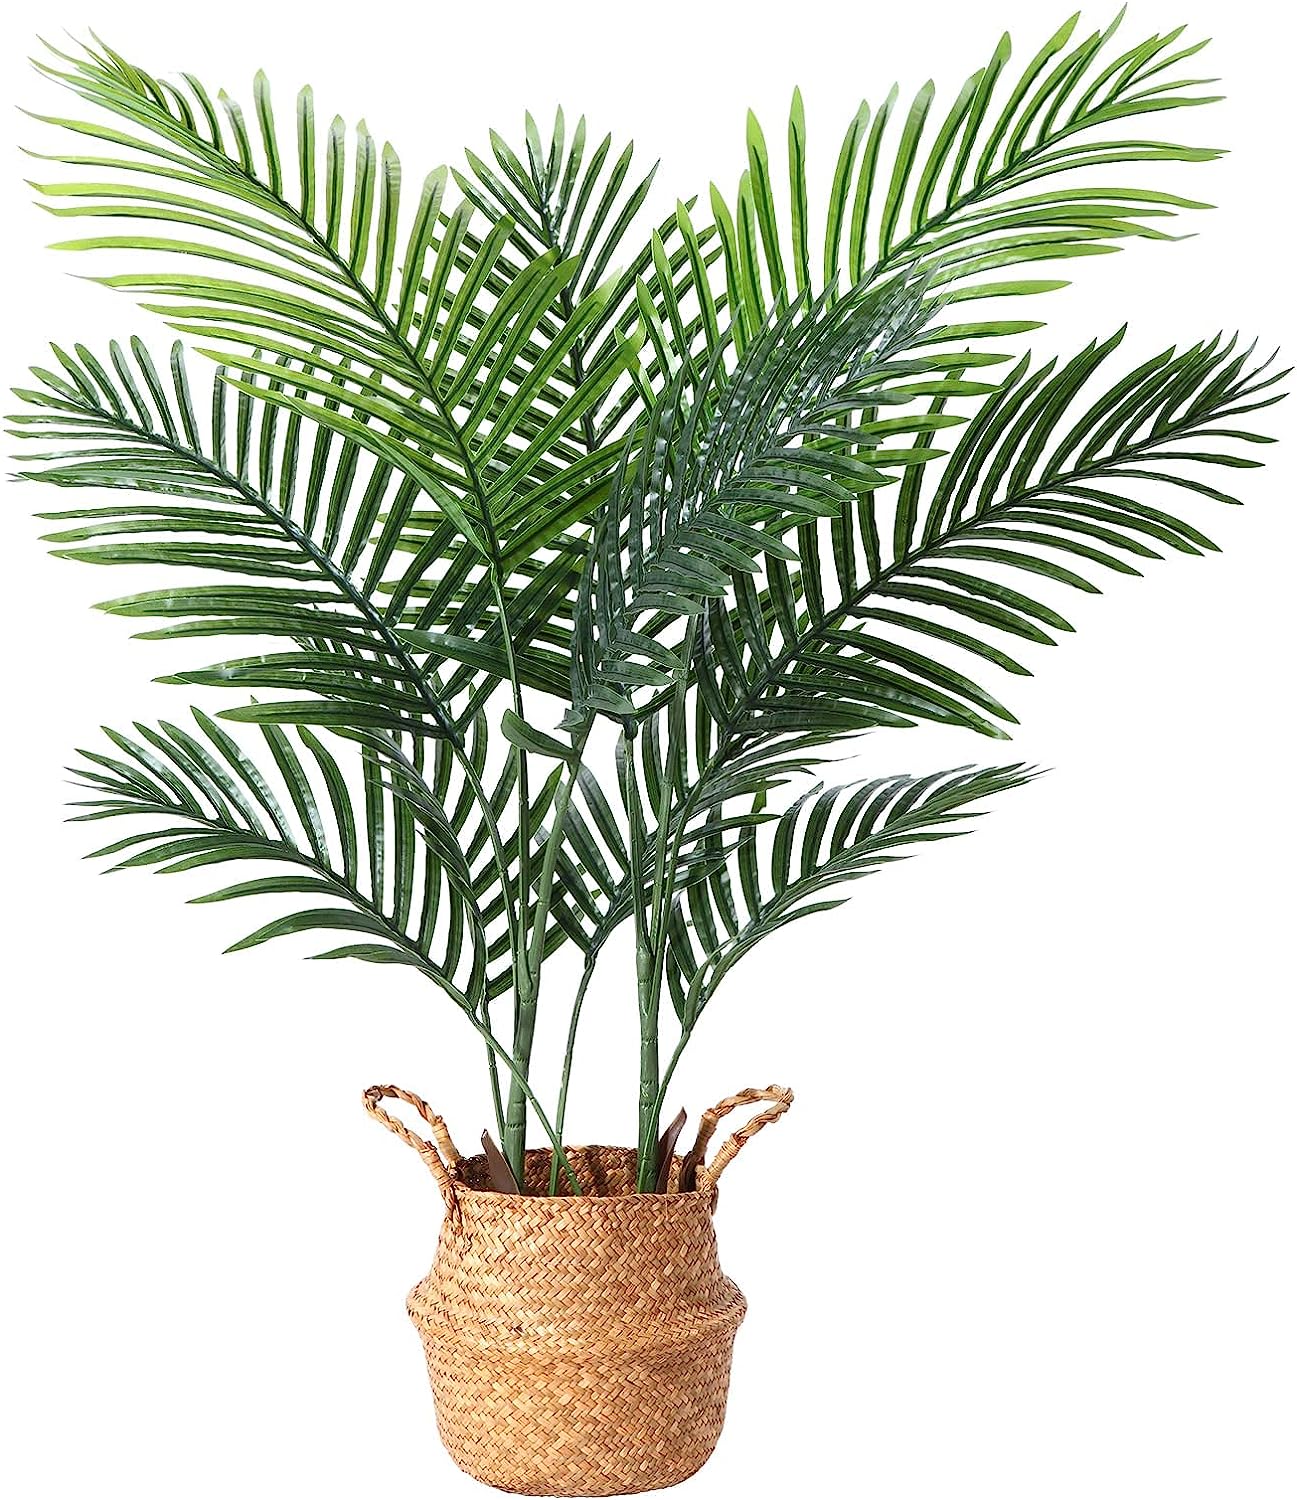 Artificial Areca Palm Plants 4.6Ft Tree with 15 Trunks in Pot and Woven Seagrass Belly Basket Graceland Home and Living